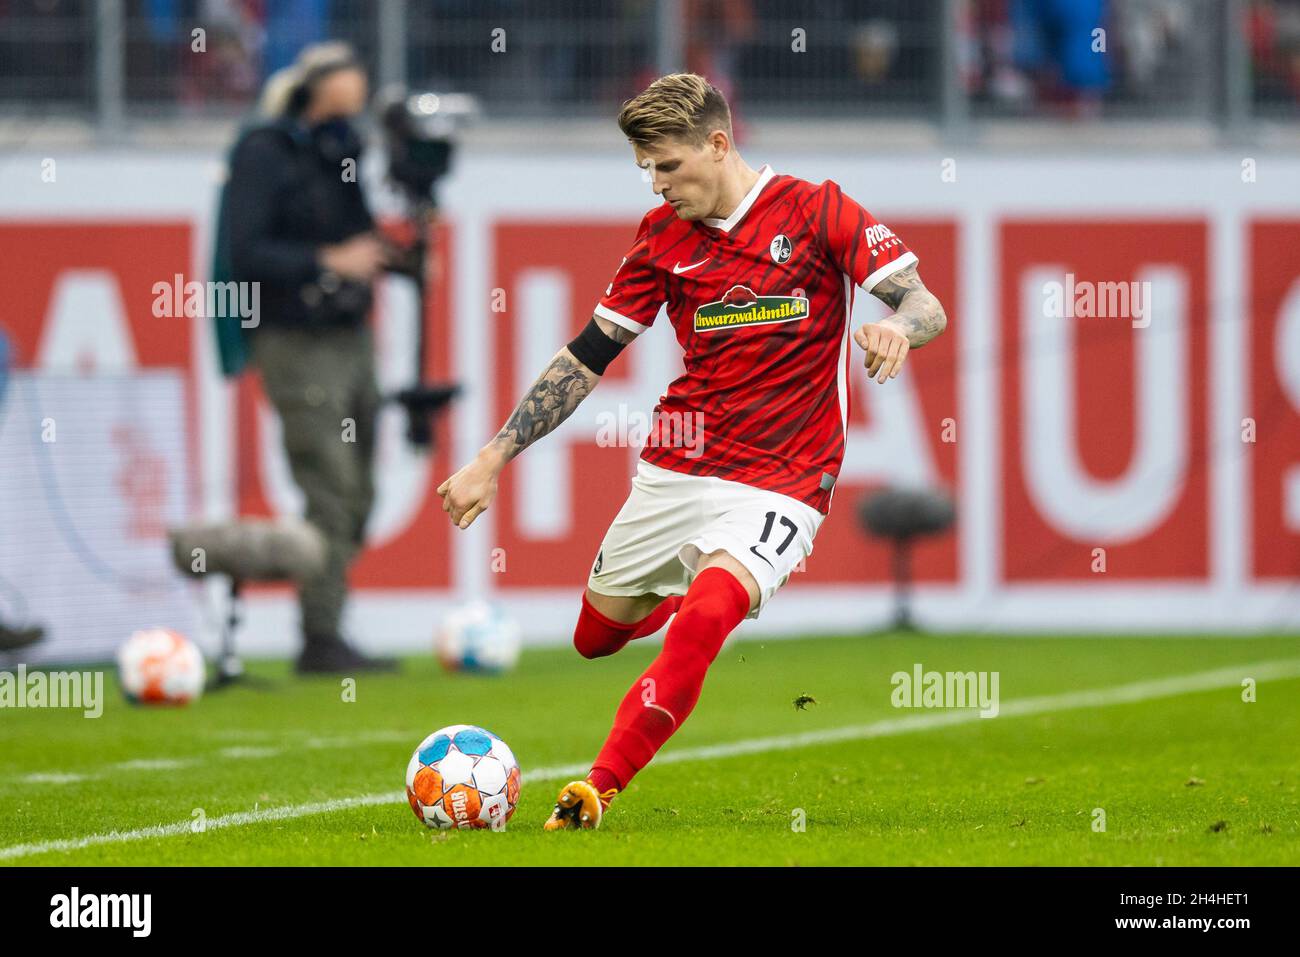 30 October 2021, Baden-Wuerttemberg, Freiburg im Breisgau: Football: Bundesliga, SC Freiburg - SpVgg Greuther Fürth, Matchday 10, Europa-Park Stadion. Freiburg's Lukas Kübler in action. IMPORTANT NOTE: In accordance with the regulations of the DFL Deutsche Fußball Liga and the DFB Deutscher Fußball-Bund, it is prohibited to use or have used photographs taken in the stadium and/or of the match in the form of sequence pictures and/or video-like photo series. Photo: Tom Weller/dpa - IMPORTANT NOTE: In accordance with the regulations of the DFL Deutsche Fußball Liga and/or the DFB Deutscher Fußbal Stock Photo